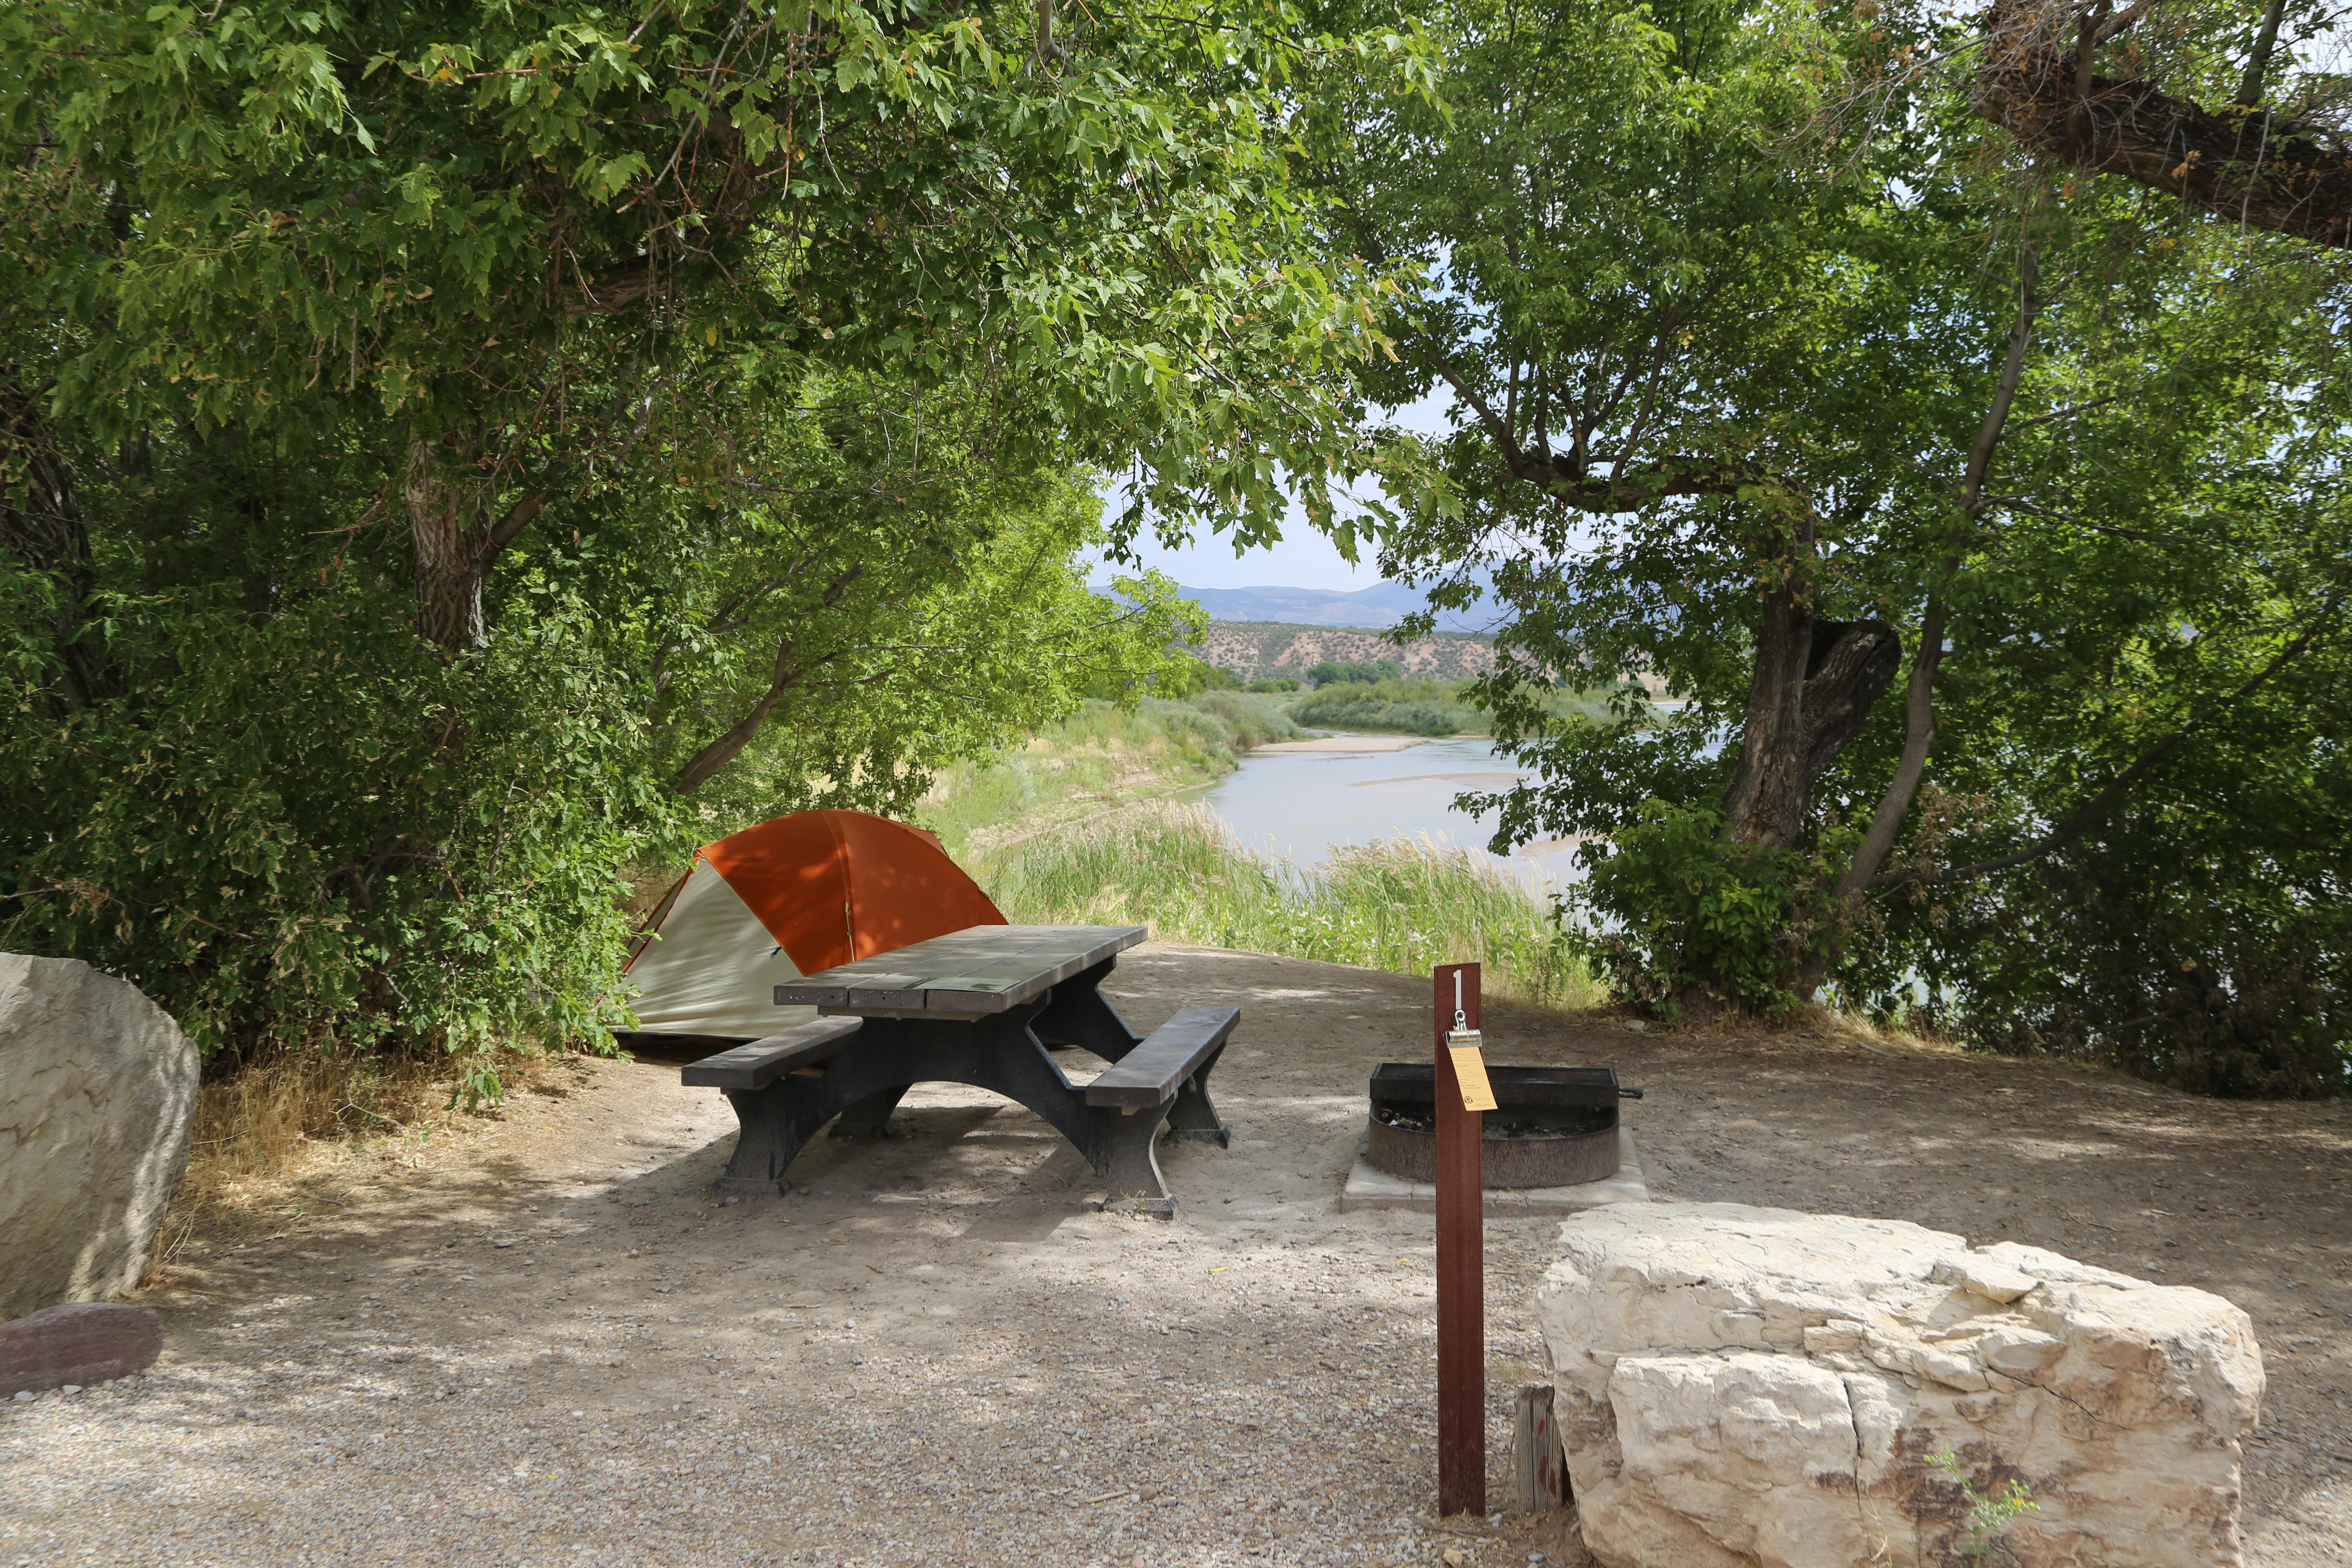 Picnic table and tent at a campsite with a river in the background.